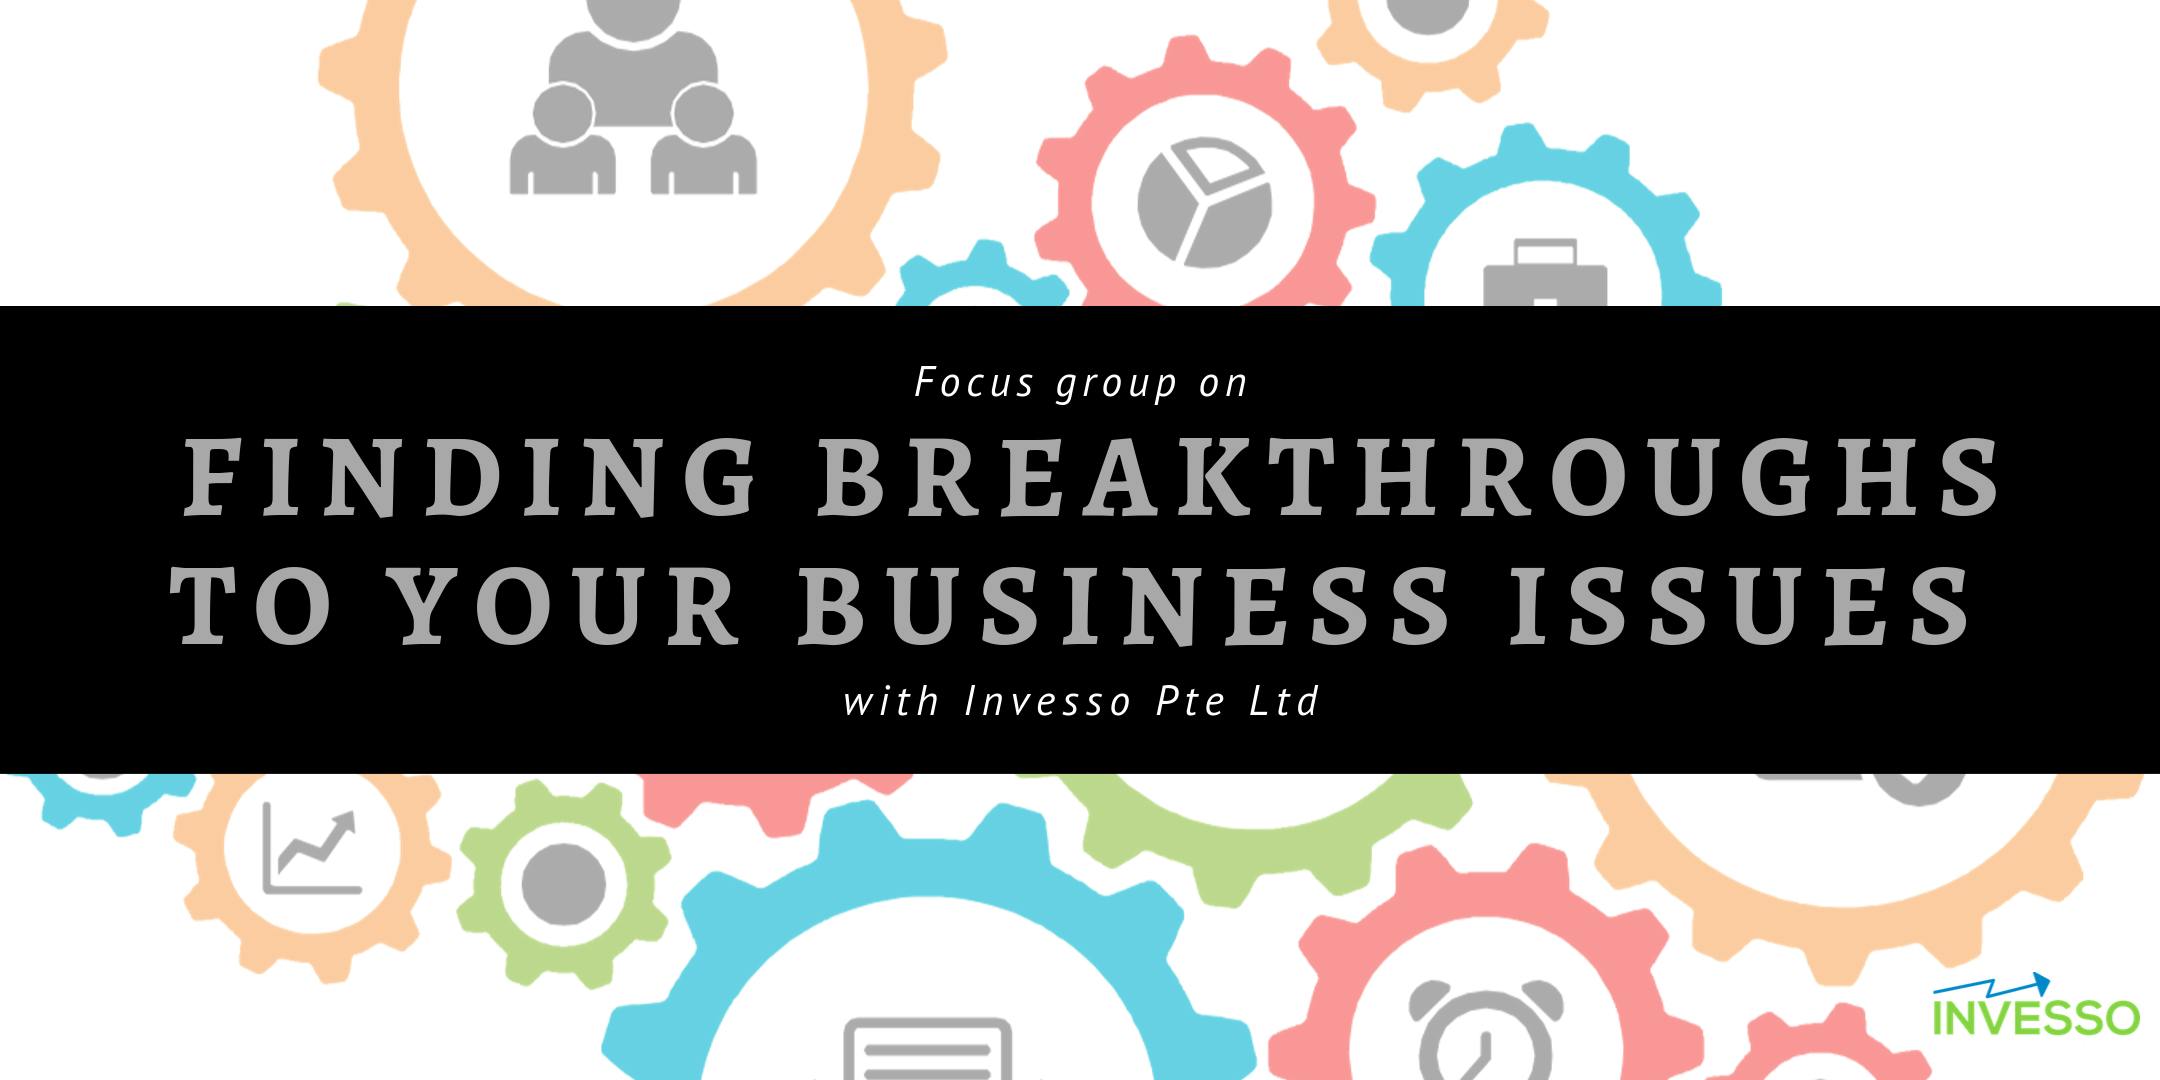 Focus Group - Finding breakthroughs to your business issues